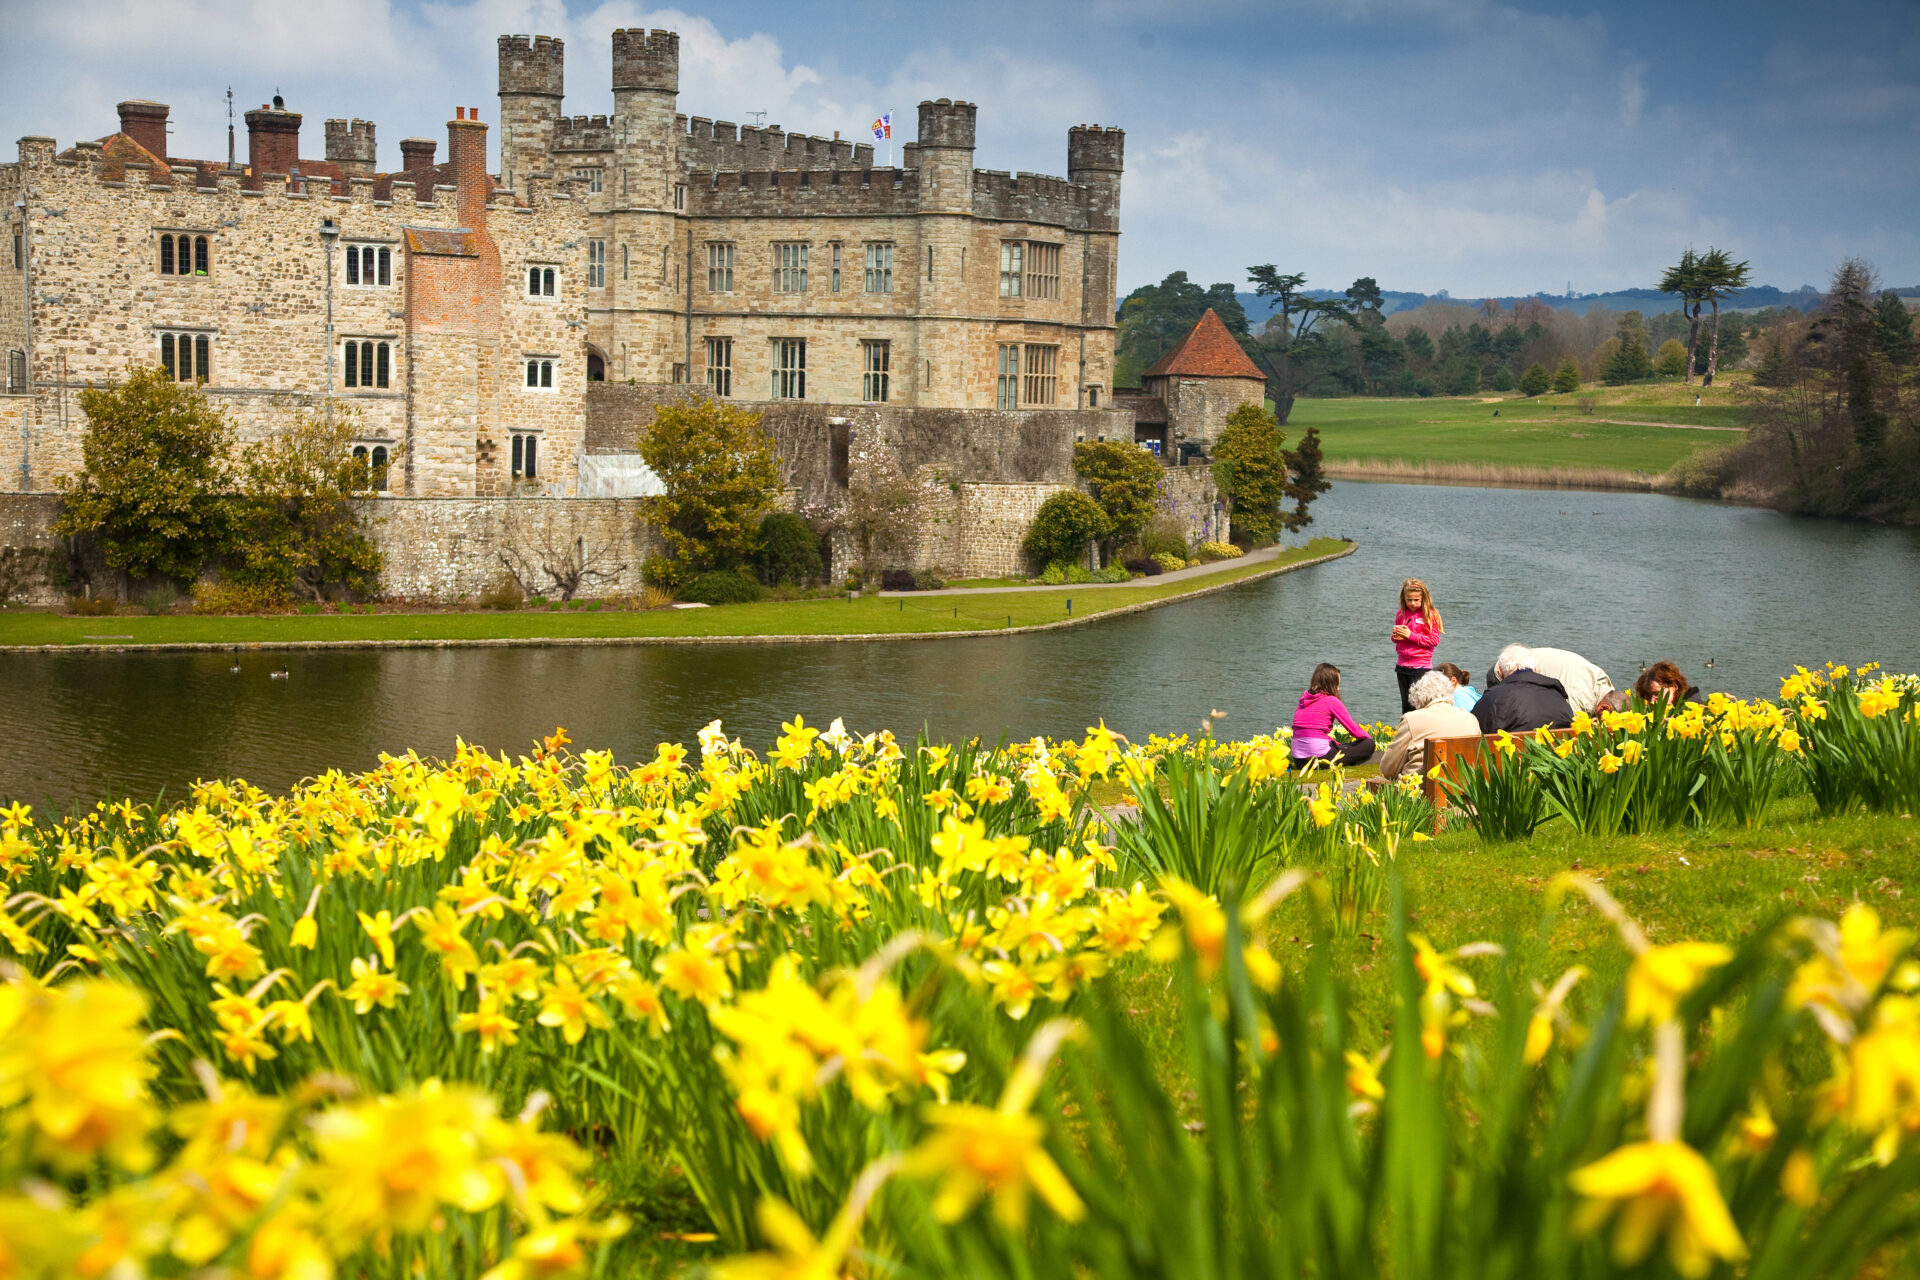 Leeds Castle with moat and grounds surrounding